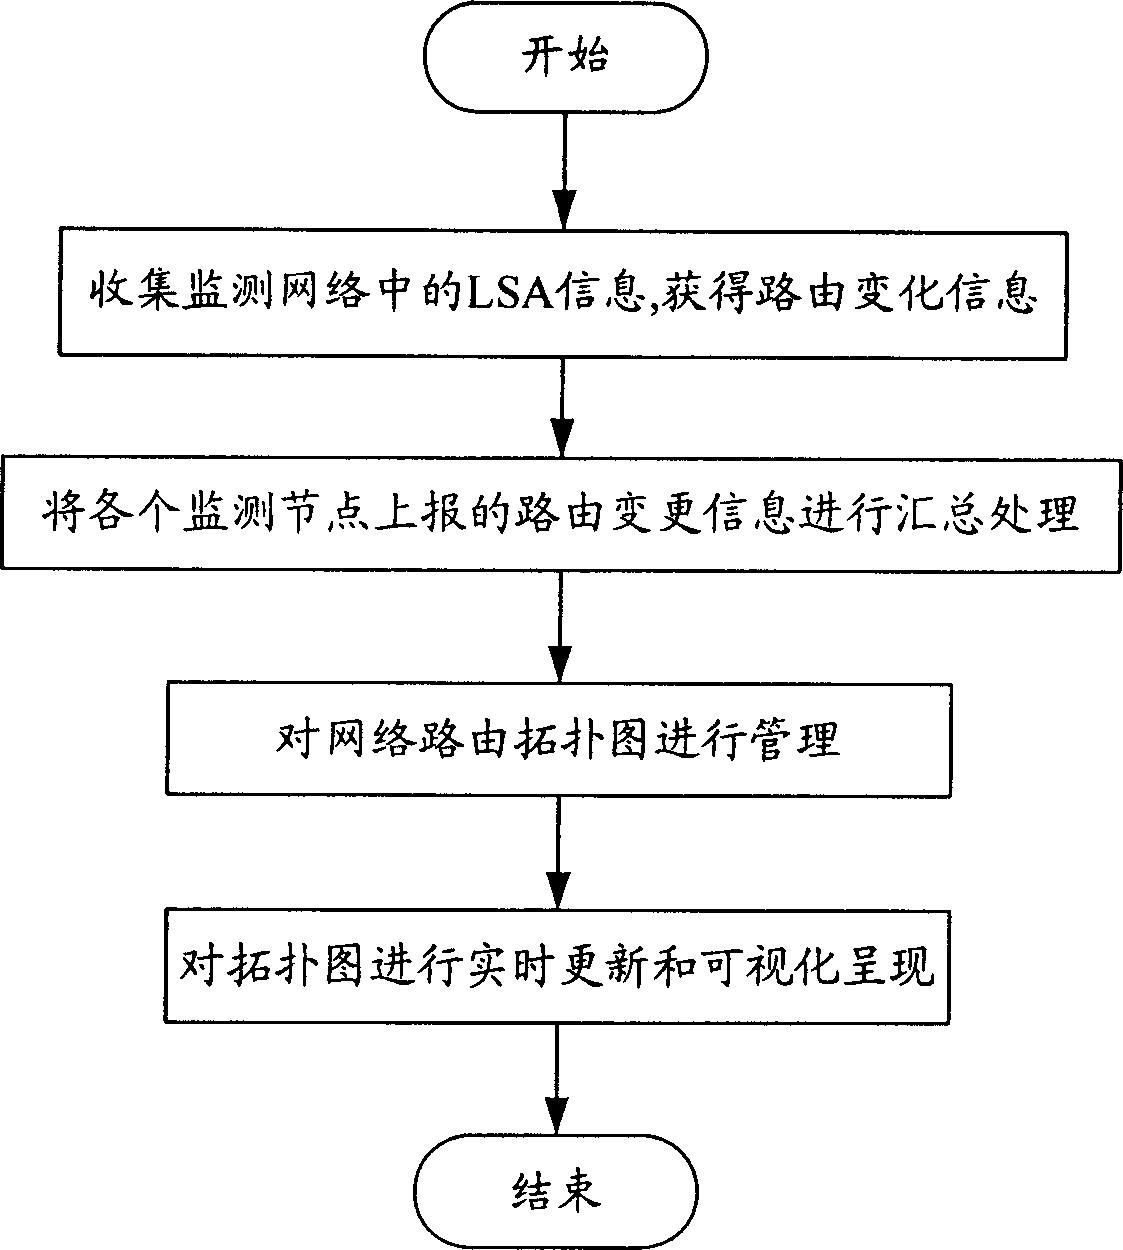 Monitoring and analyzing system for opening shortest path priority route protocol and working method